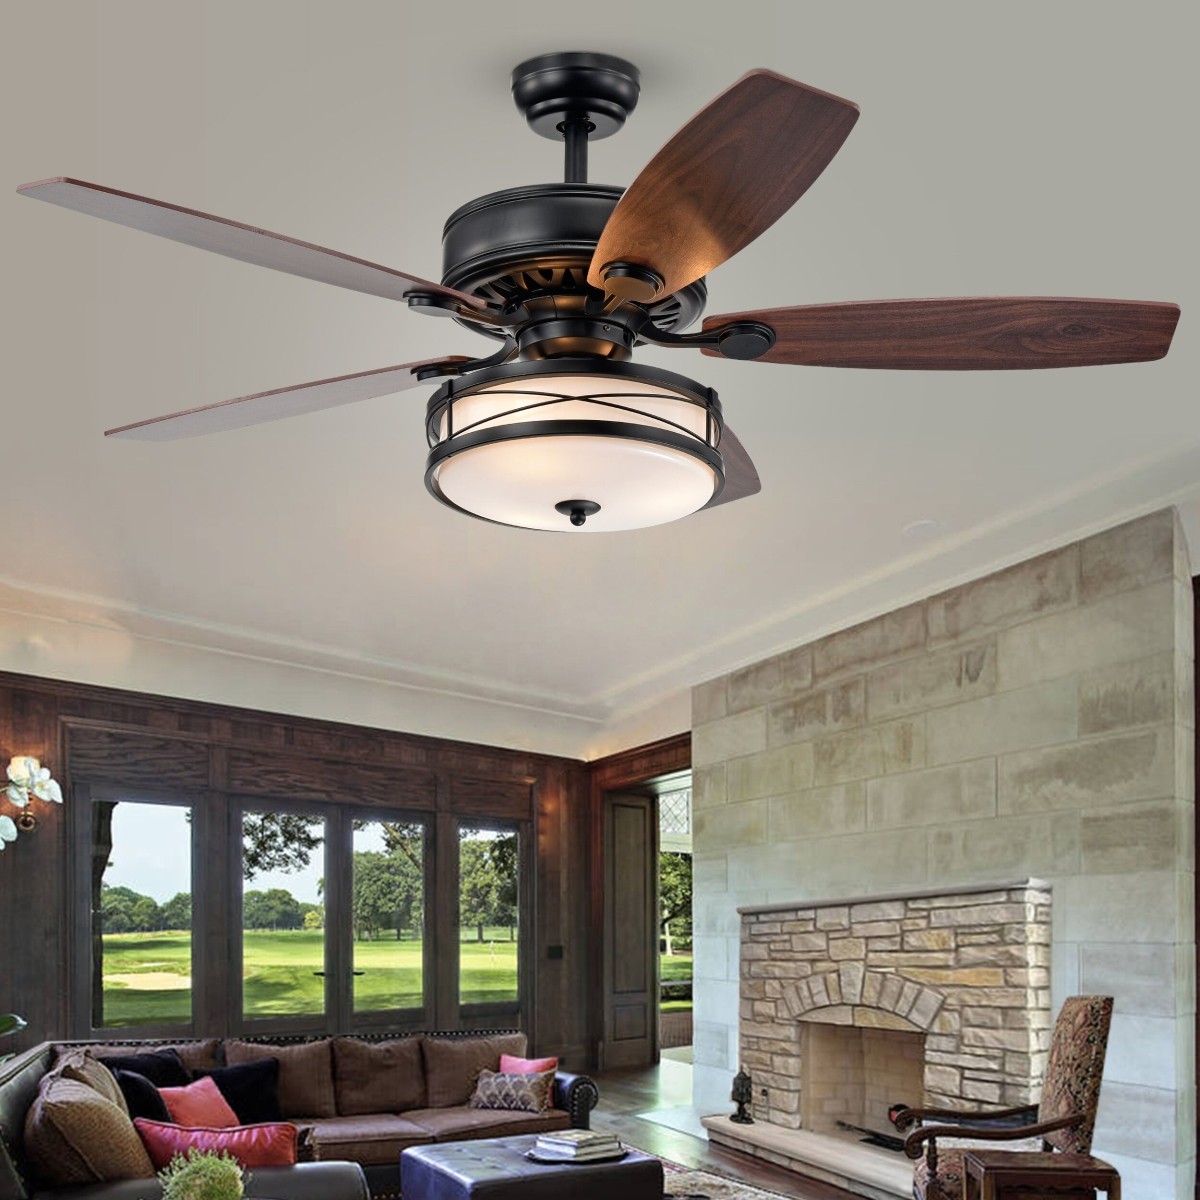 Silver Orchid Farrar Chrome 52-Inch 5-Blade Lighted Ceiling Fan with Metal Bowl Shade (Includes Remote)